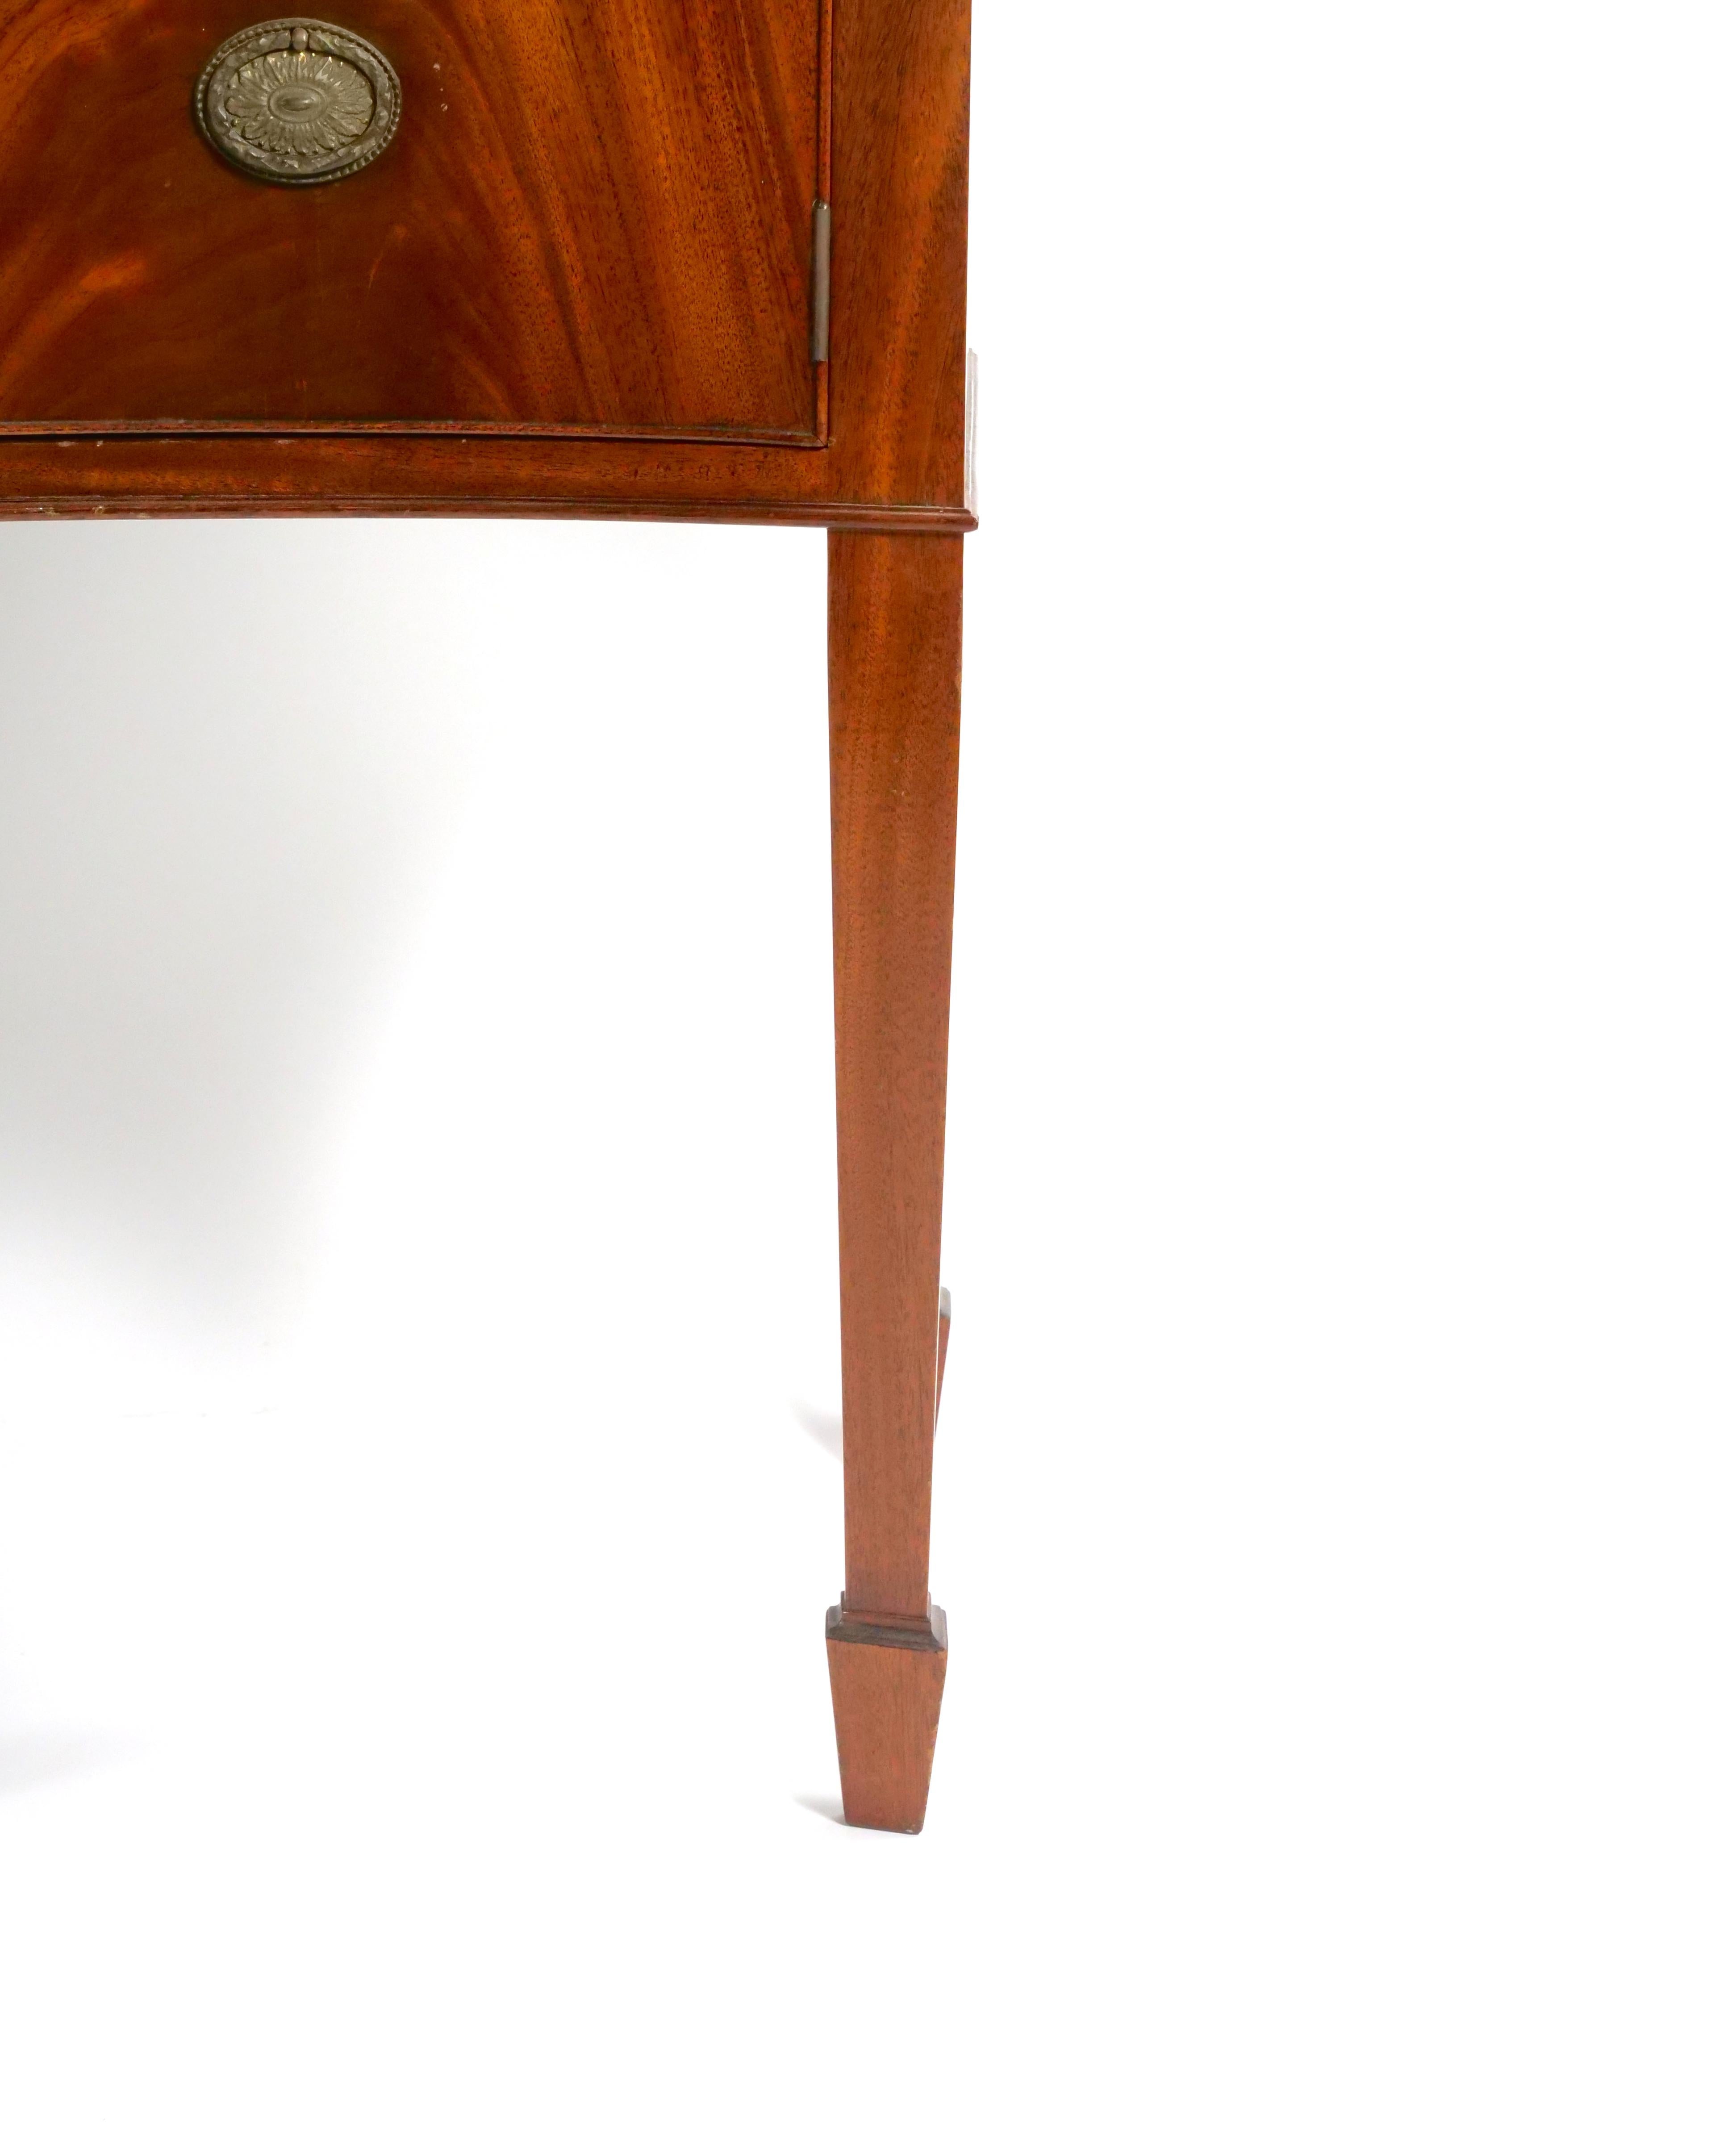 Early 20th Century George III Flame Mahogany Serpentine Sideboard / Server For Sale 4